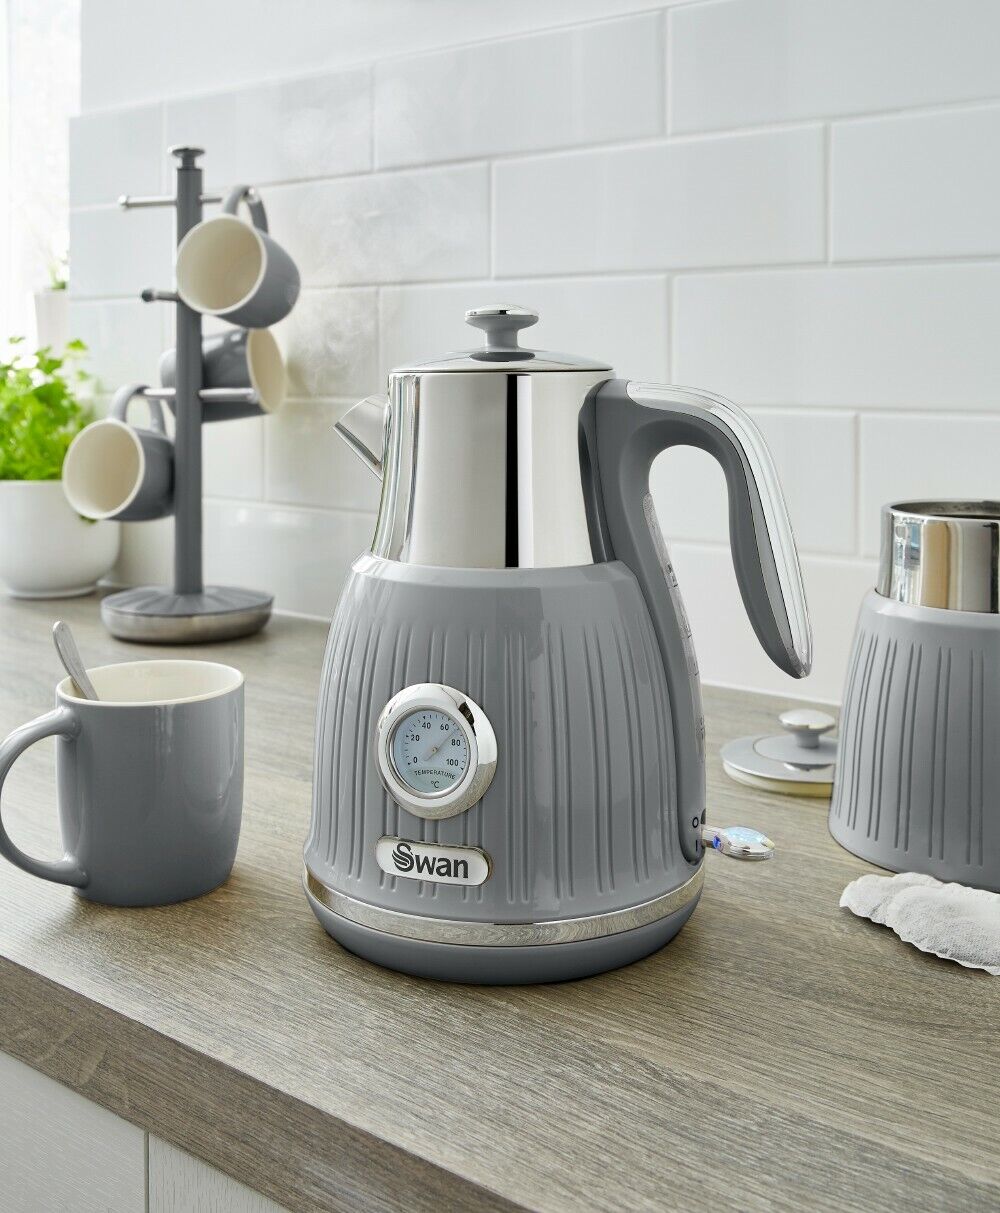 SWAN Retro Grey Dial Kettle Toaster Microwave Bread Bin & Canisters Kitchen Set